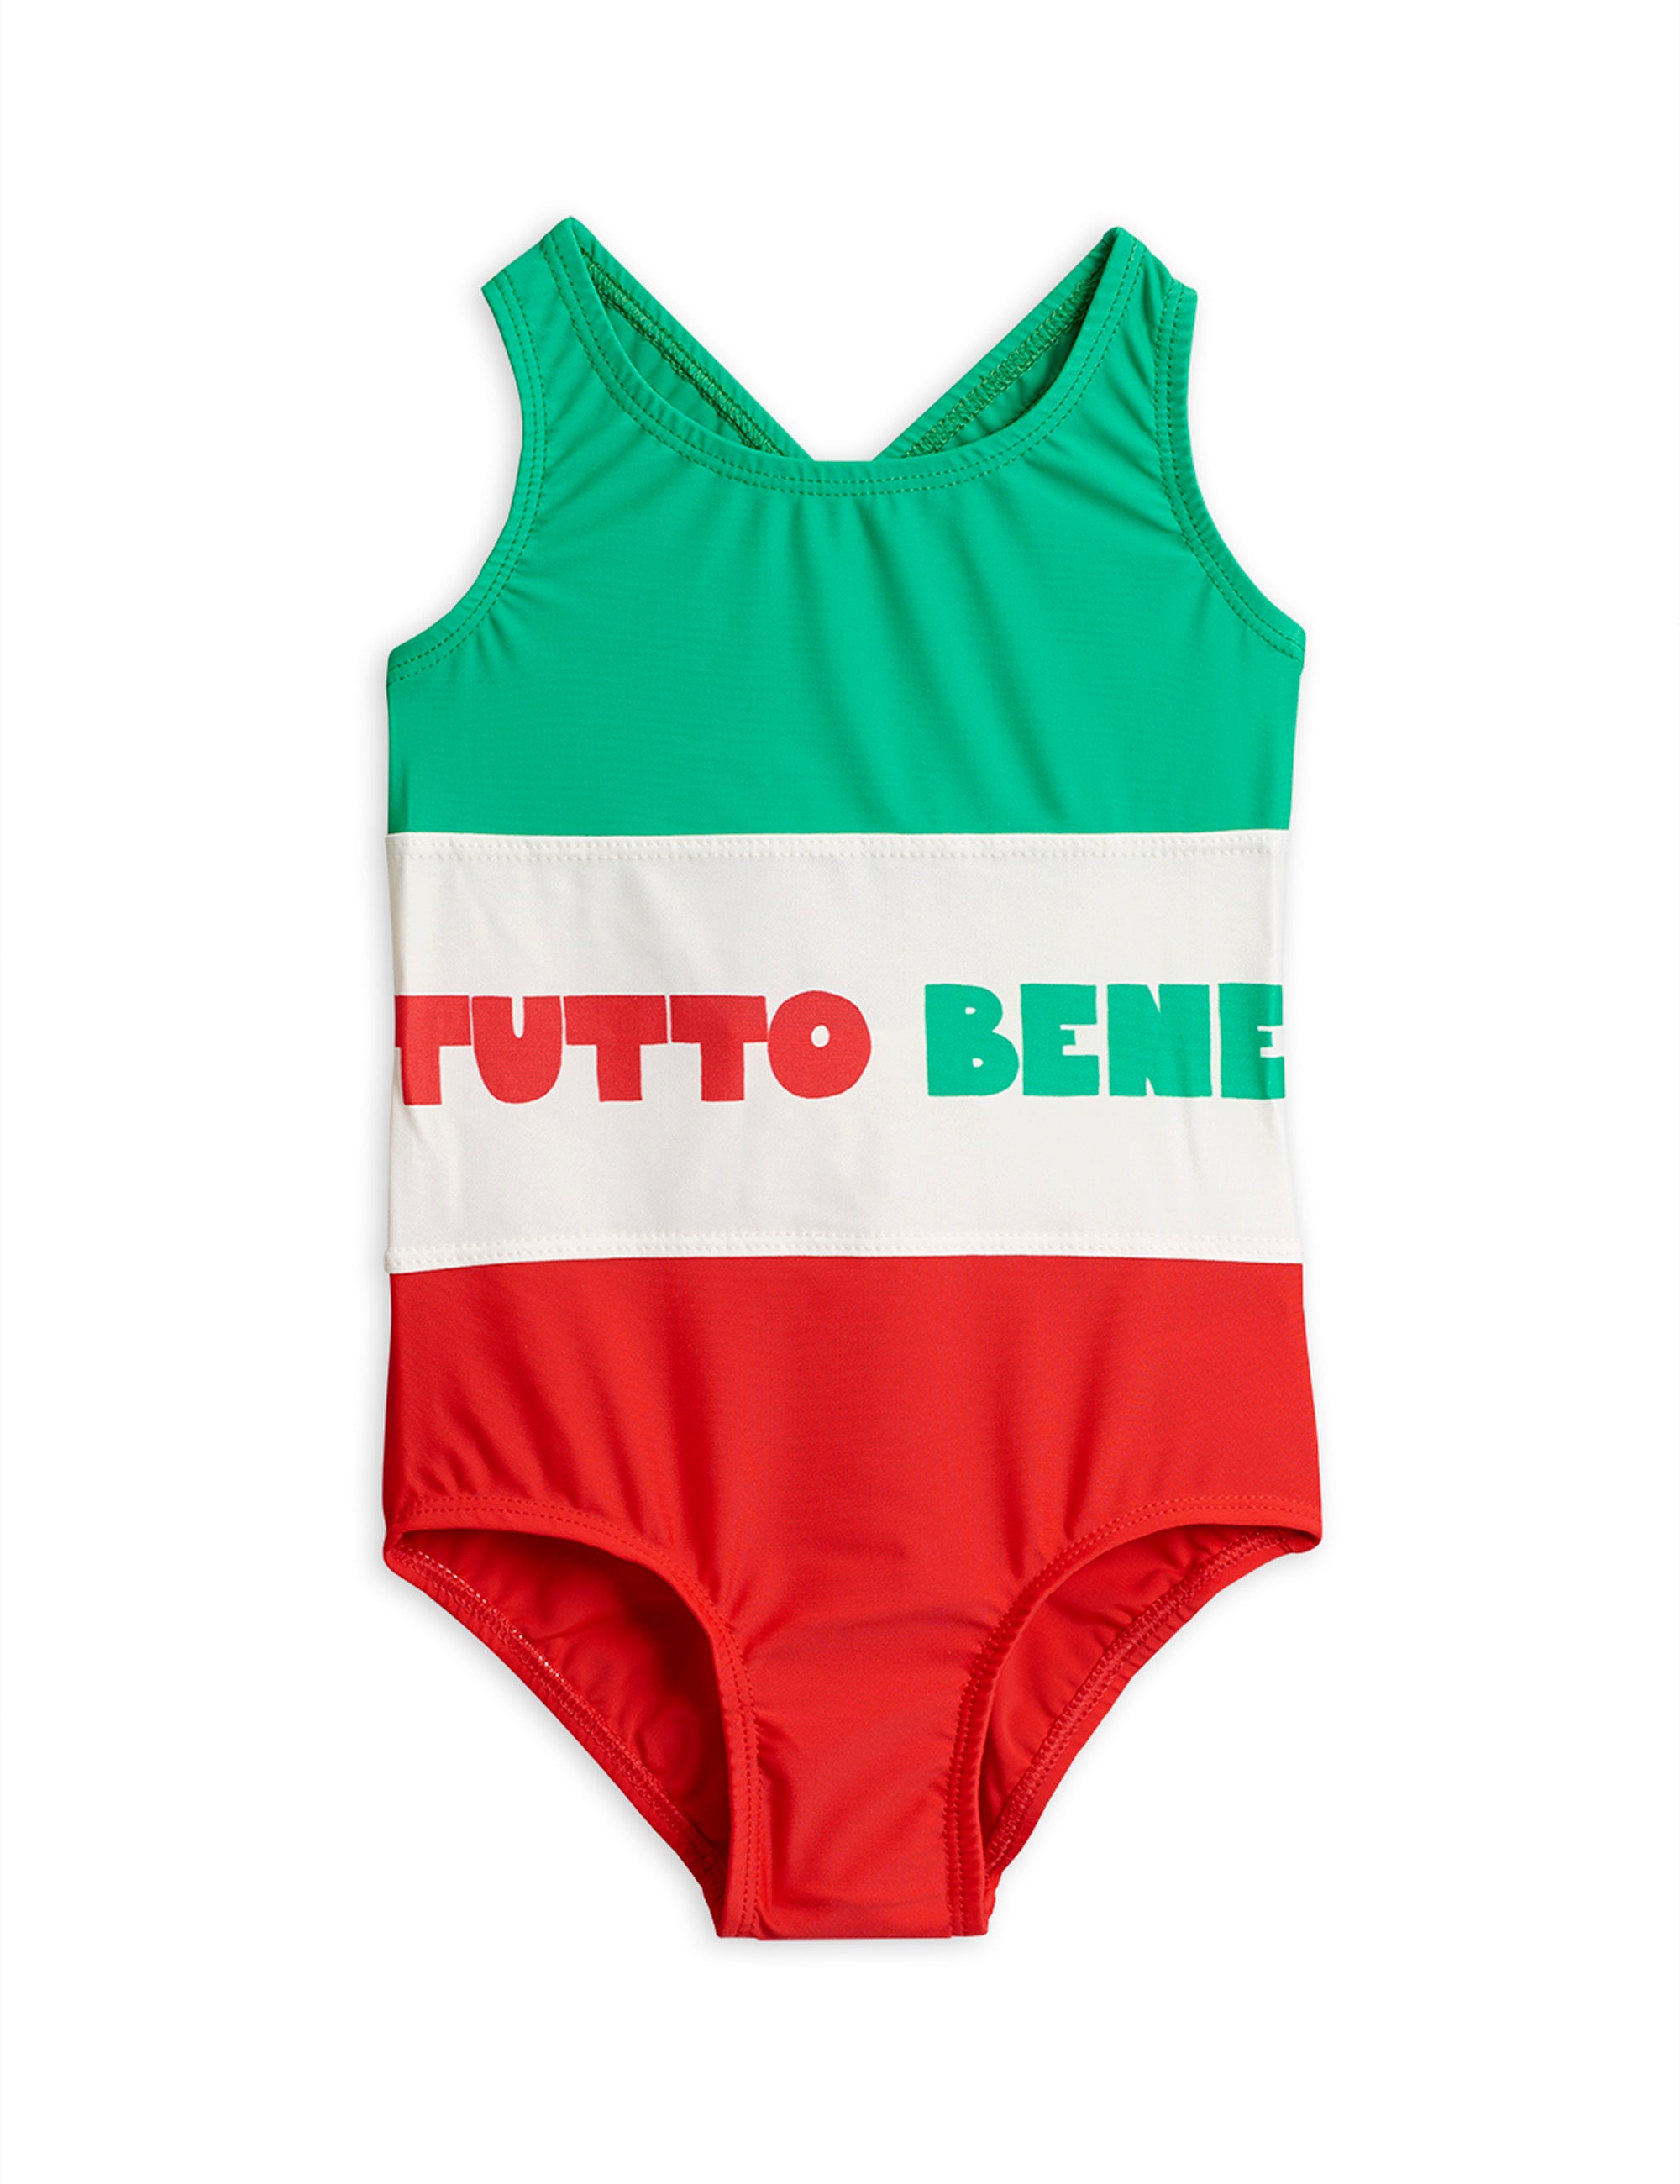 Girls Green & Red Swimsuit